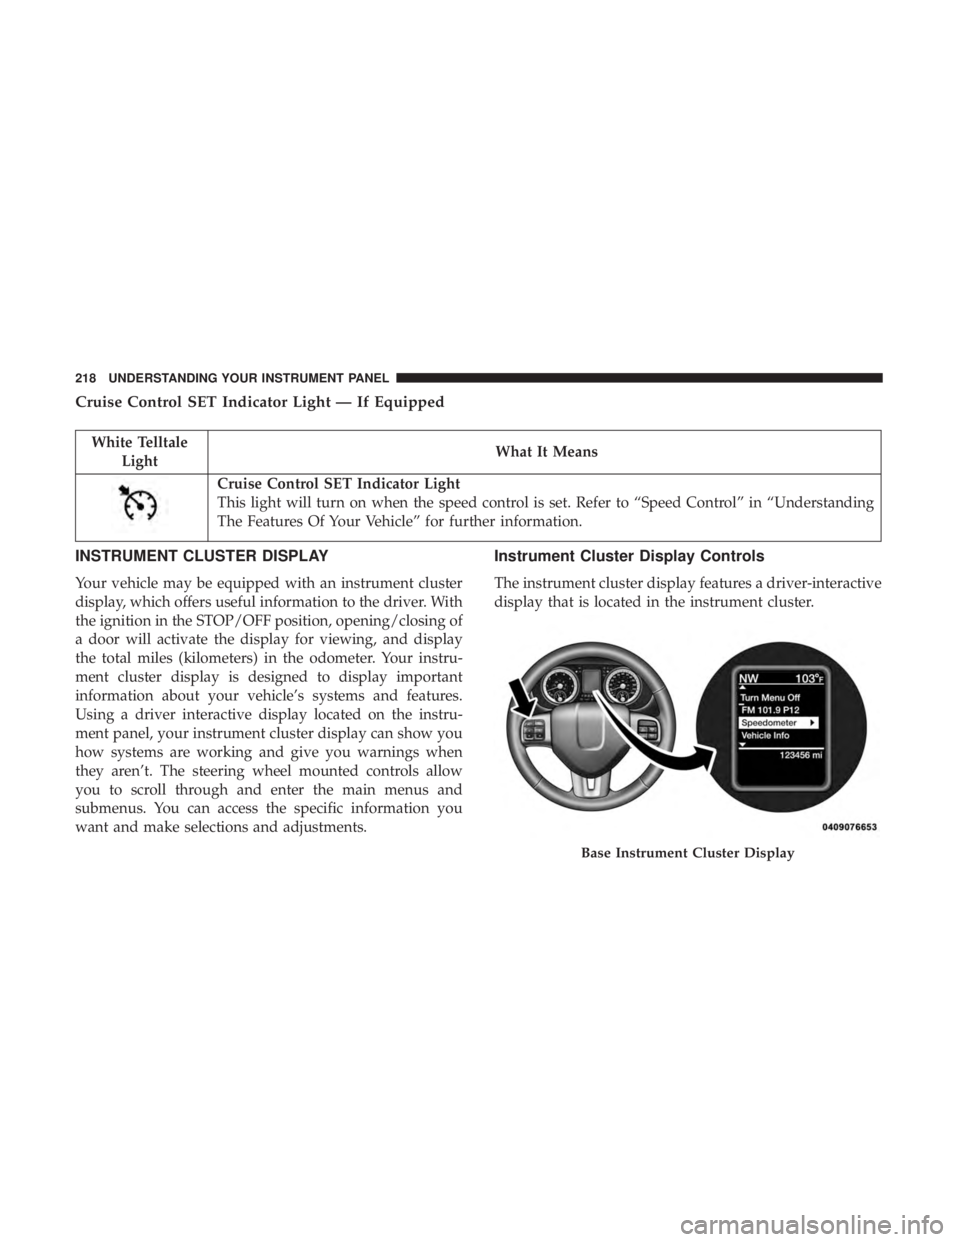 RAM CHASSIS CAB 2017  Owners Manual Cruise Control SET Indicator Light — If Equipped
White Telltale
Light What It Means
Cruise Control SET Indicator Light
This light will turn on when the speed control is set. Refer to “Speed Contro